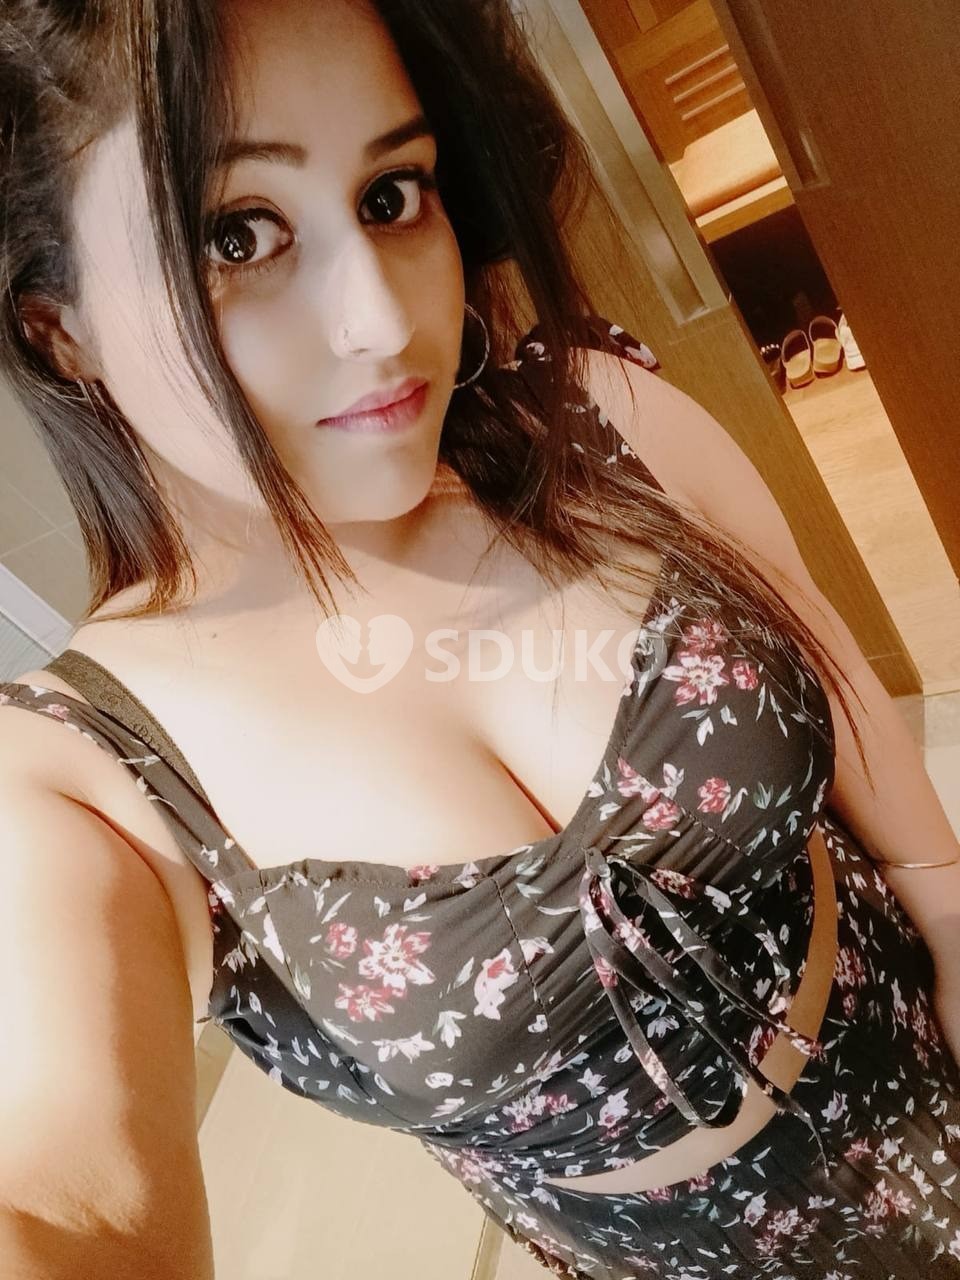 PUNE ❤ HOME 😍 AND HOTEL SERVICE AVAILABLE FULL SAFE AND SECURE SERVICE AVAILABLE...